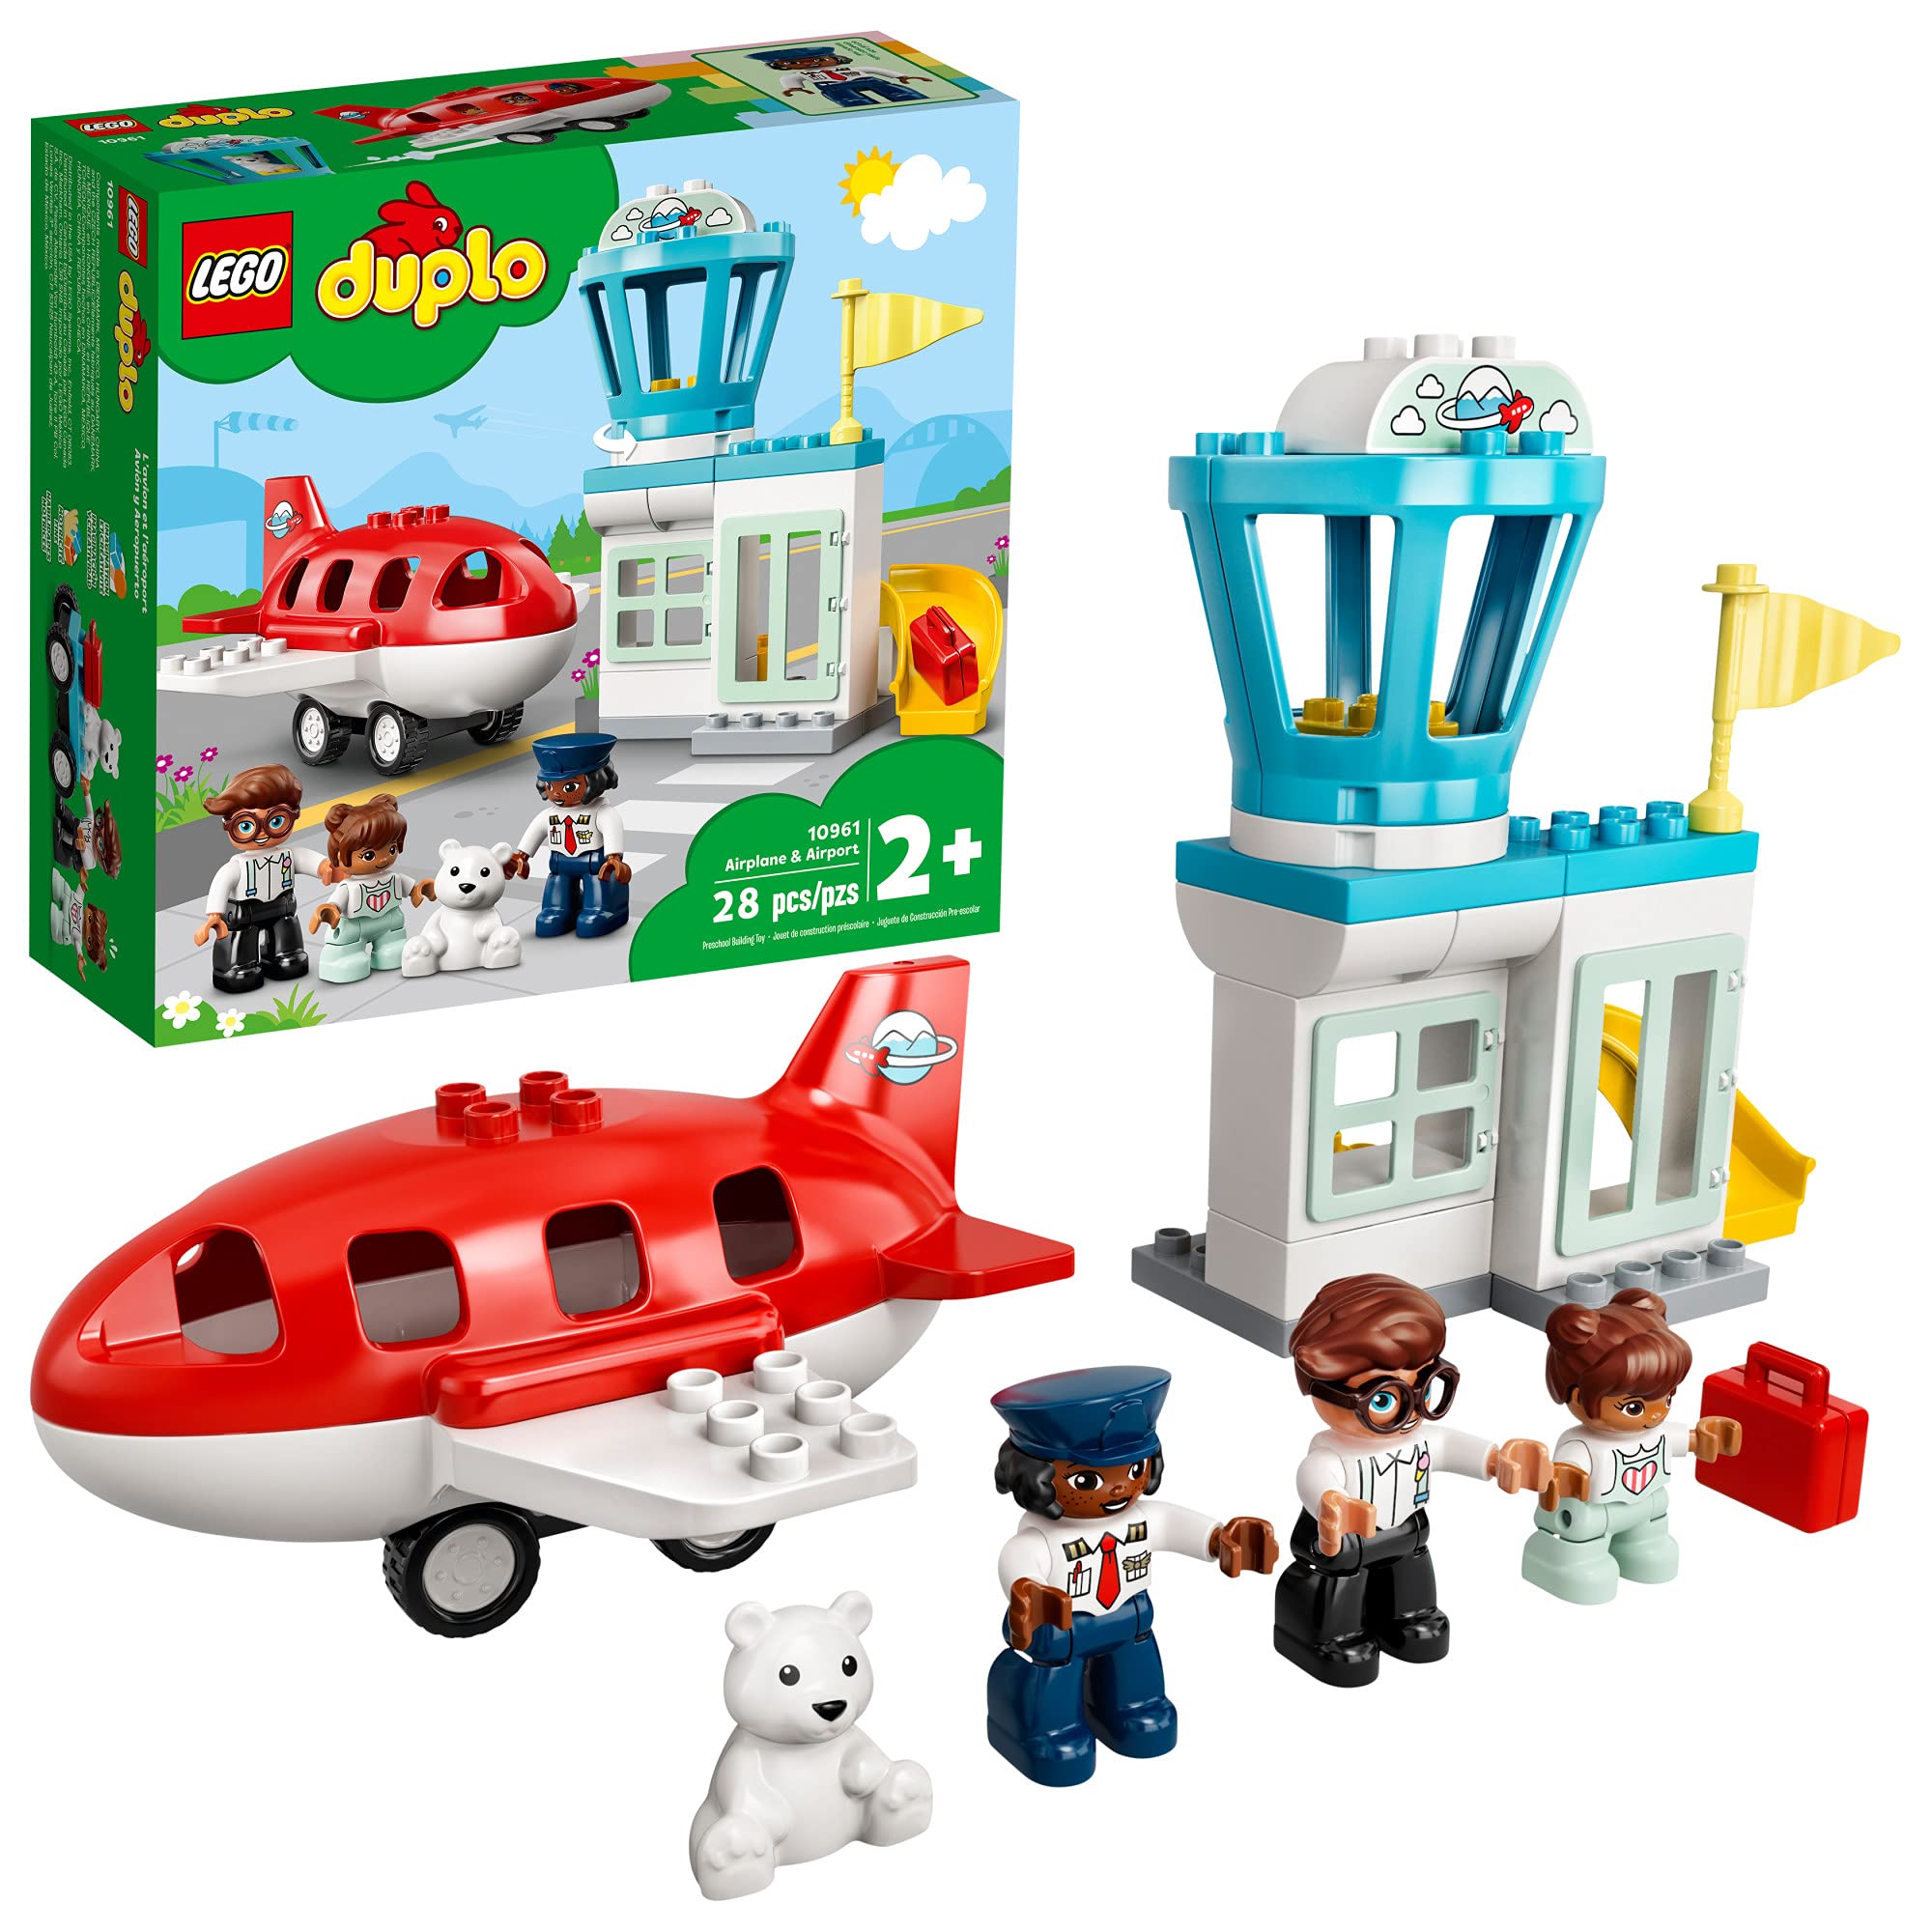 LEGO DUPLO Town Airplane & Airport 10961 Building Toy; Imaginative Playset for Kids; Great, Fun Gift for Toddlers; New 2021 (28 Pieces),Multicolor,One Size